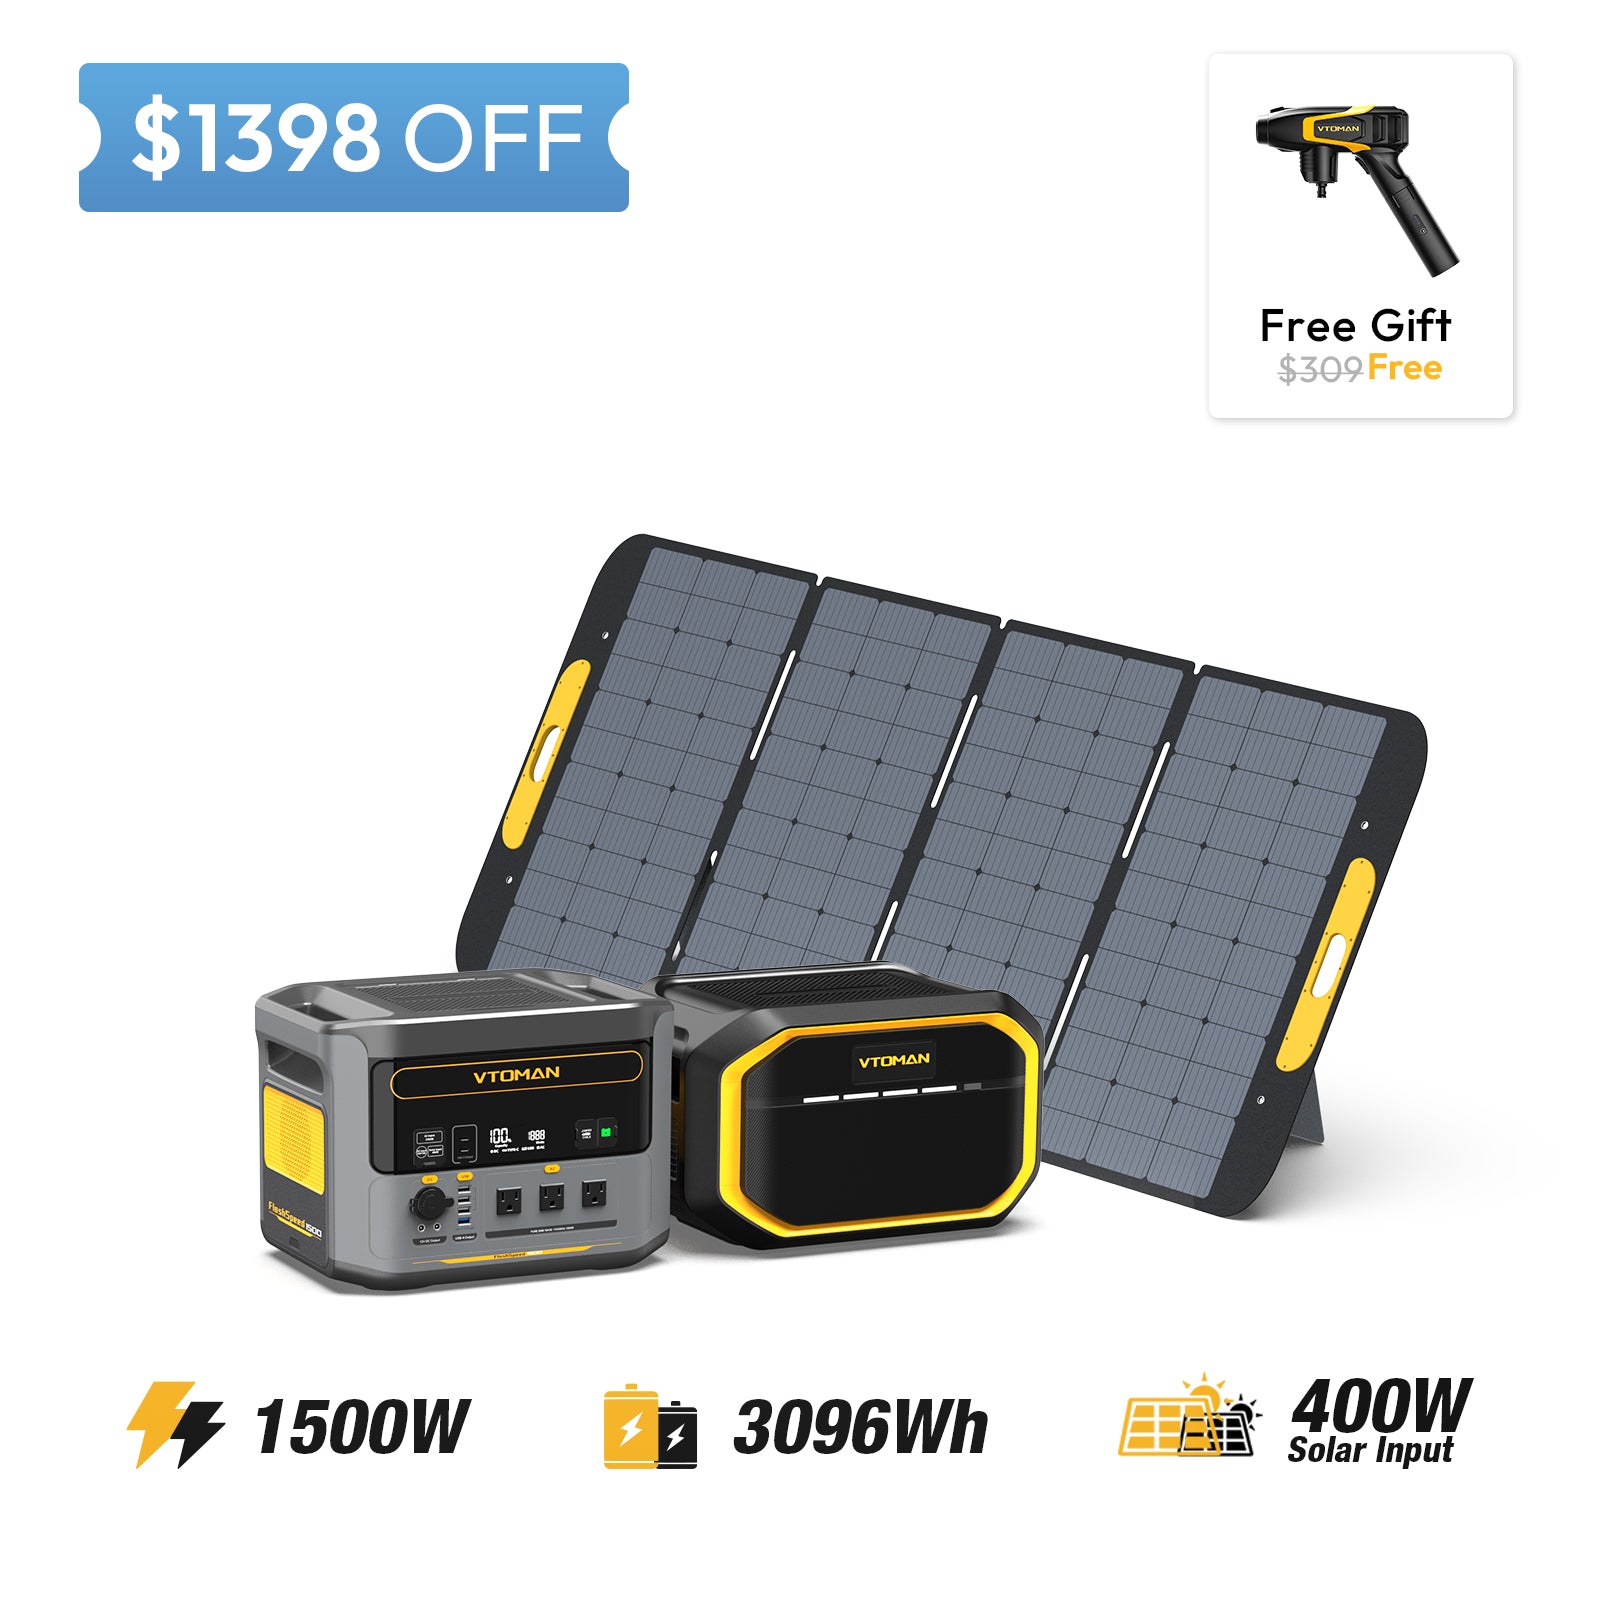 FlashSpeed 1500 and 1548Wh extra battery and 400W solar panel save $1398 in summer sale